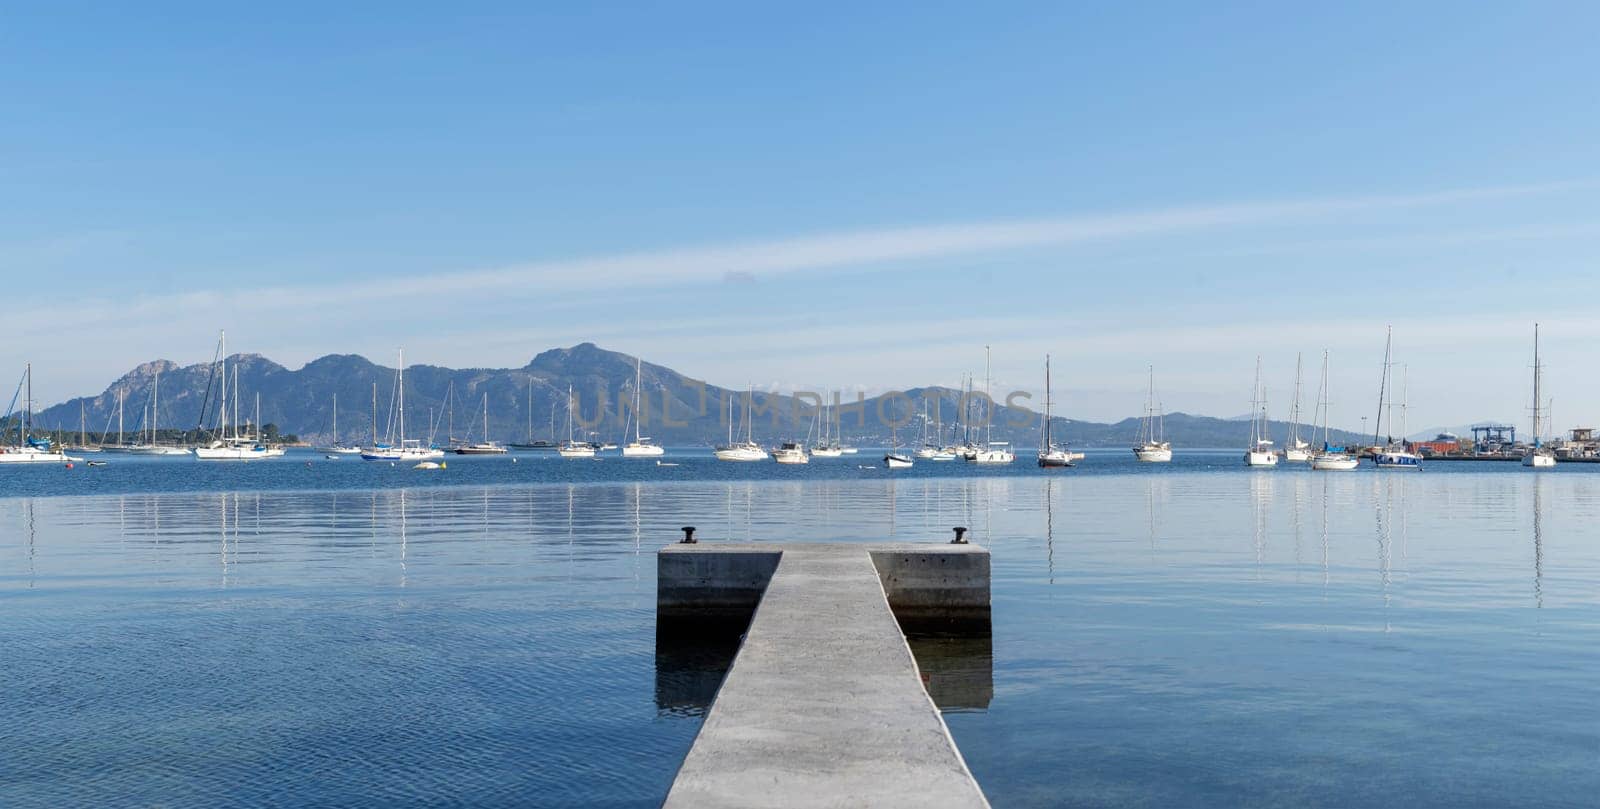 A tranquil concrete pier stretches out into a calm blue bay, where a flotilla of sailboats peacefully anchors against a backdrop of gentle hills under a clear sky. The mirror-like water reflects the boats and distant mountains, creating a scene of perfect symmetry and stillness